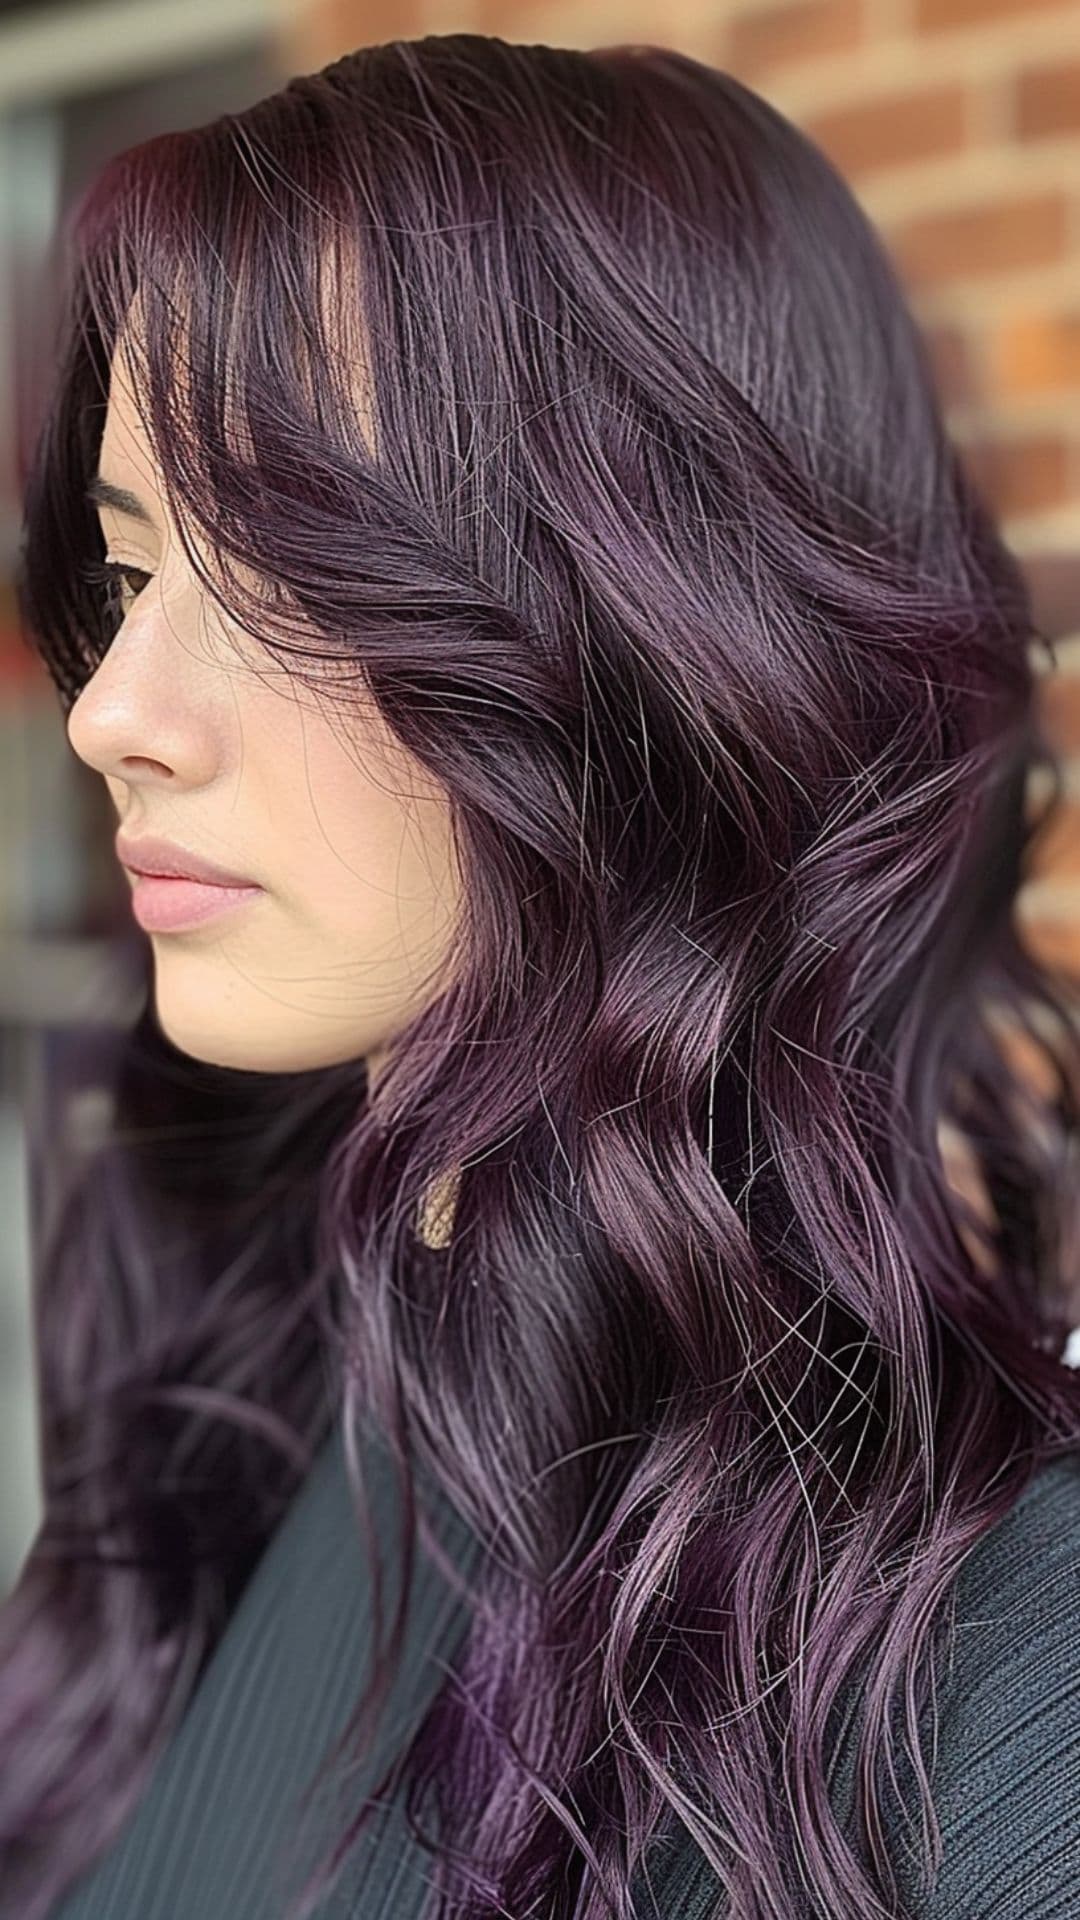 A woman modelling an eggplant hair color.